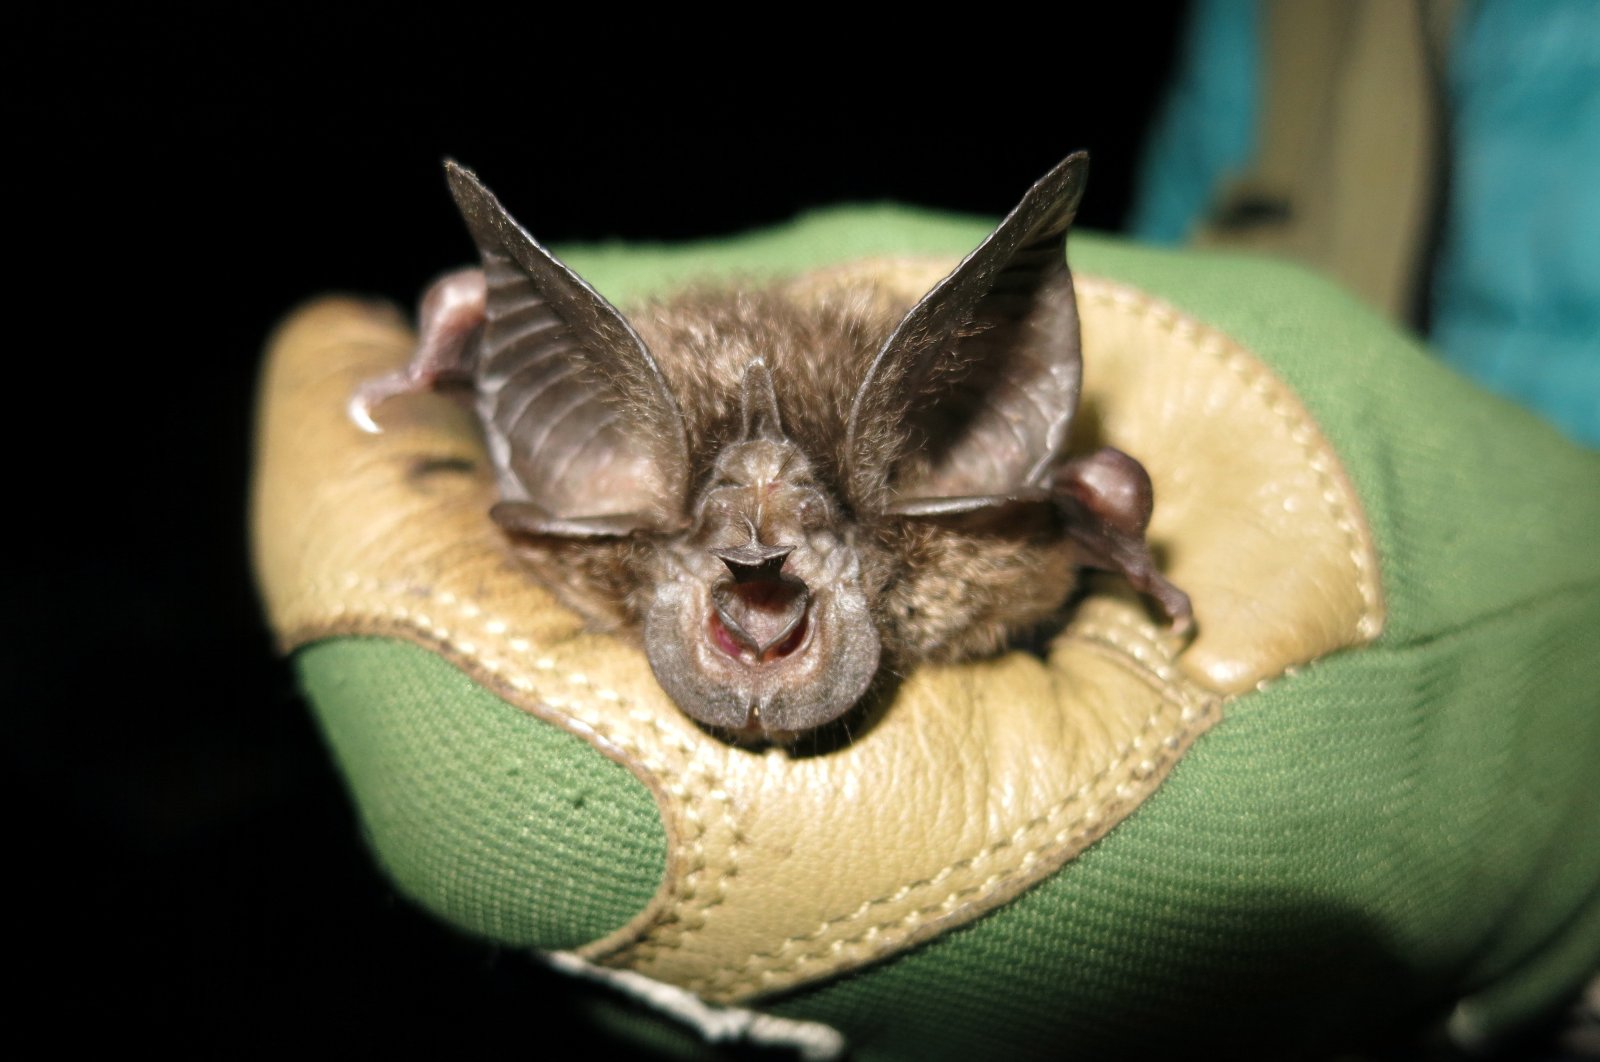 A handout photo made available by the Bat Conservation International organization shows a bat of the species Rhinolophus hilli found in one of the caves in Nyungwe National Park, Nyungwe, Rwanda, March 8, 2022. (EPA Photo)